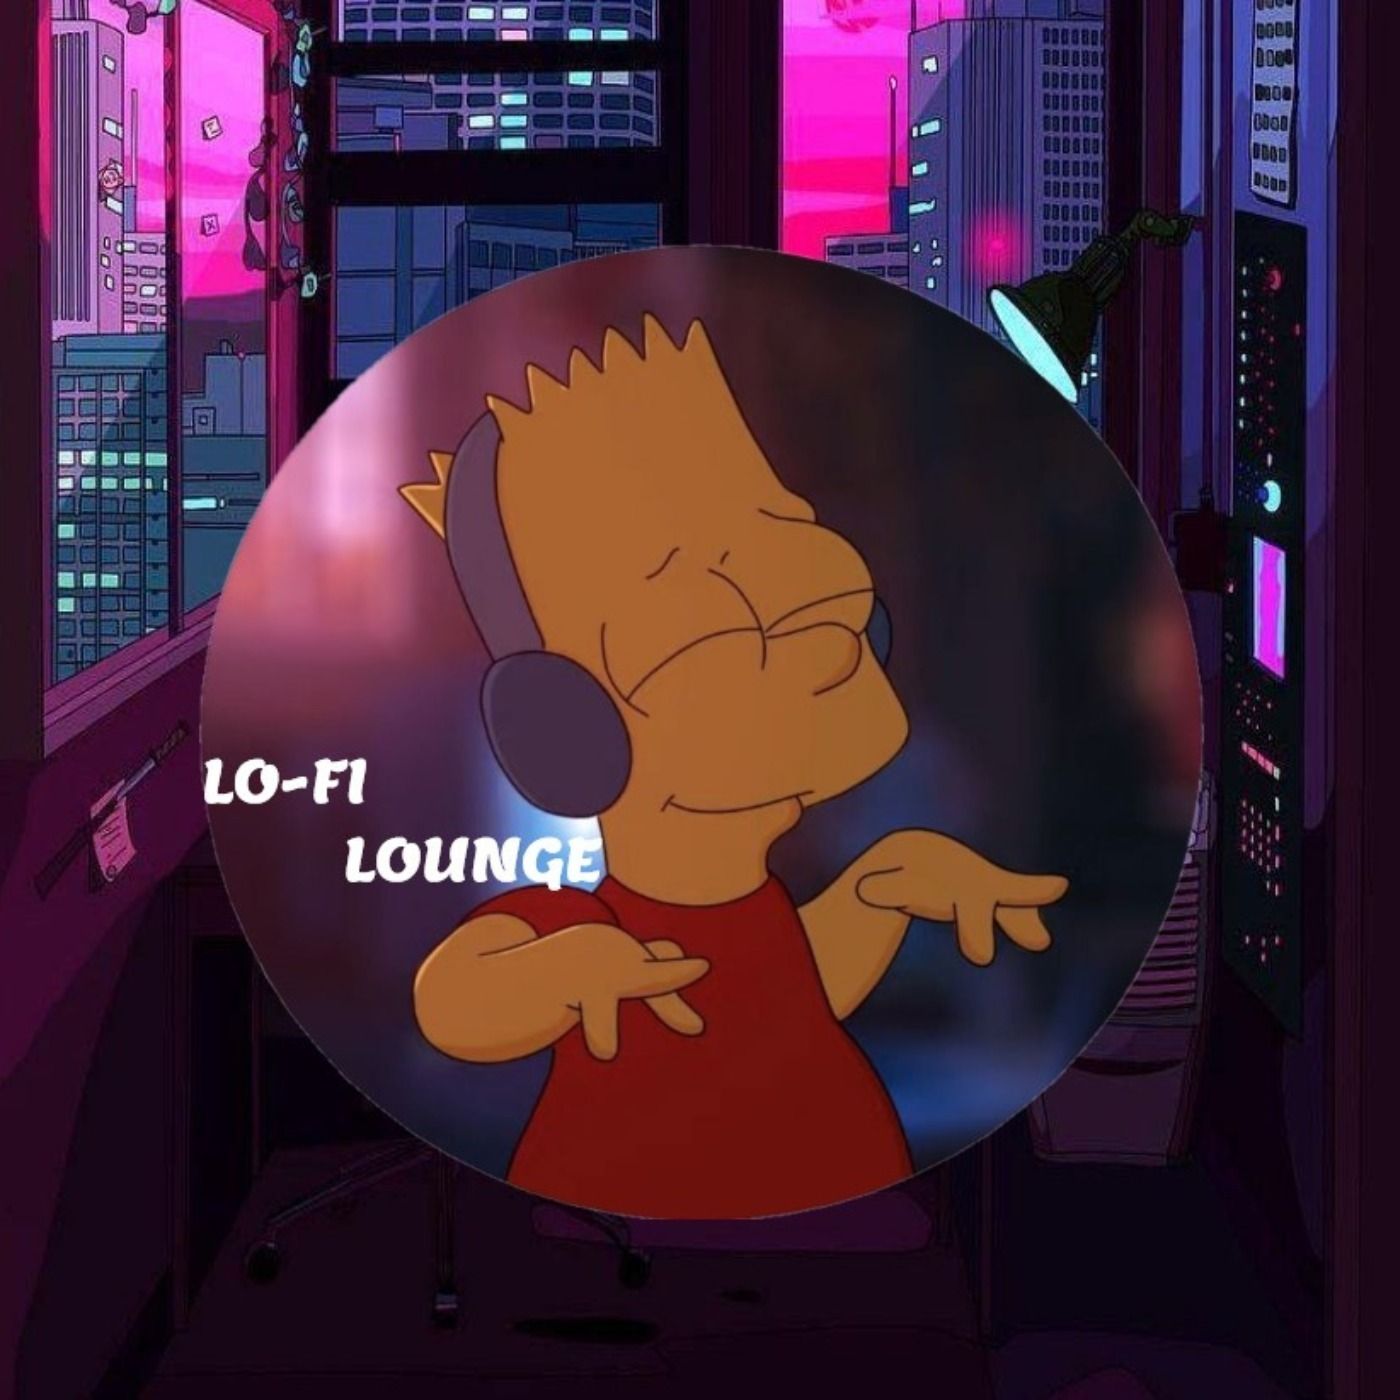 The Sound of LoFi: Let Your Mind Travel Freely with This Relaxing LoFi Music